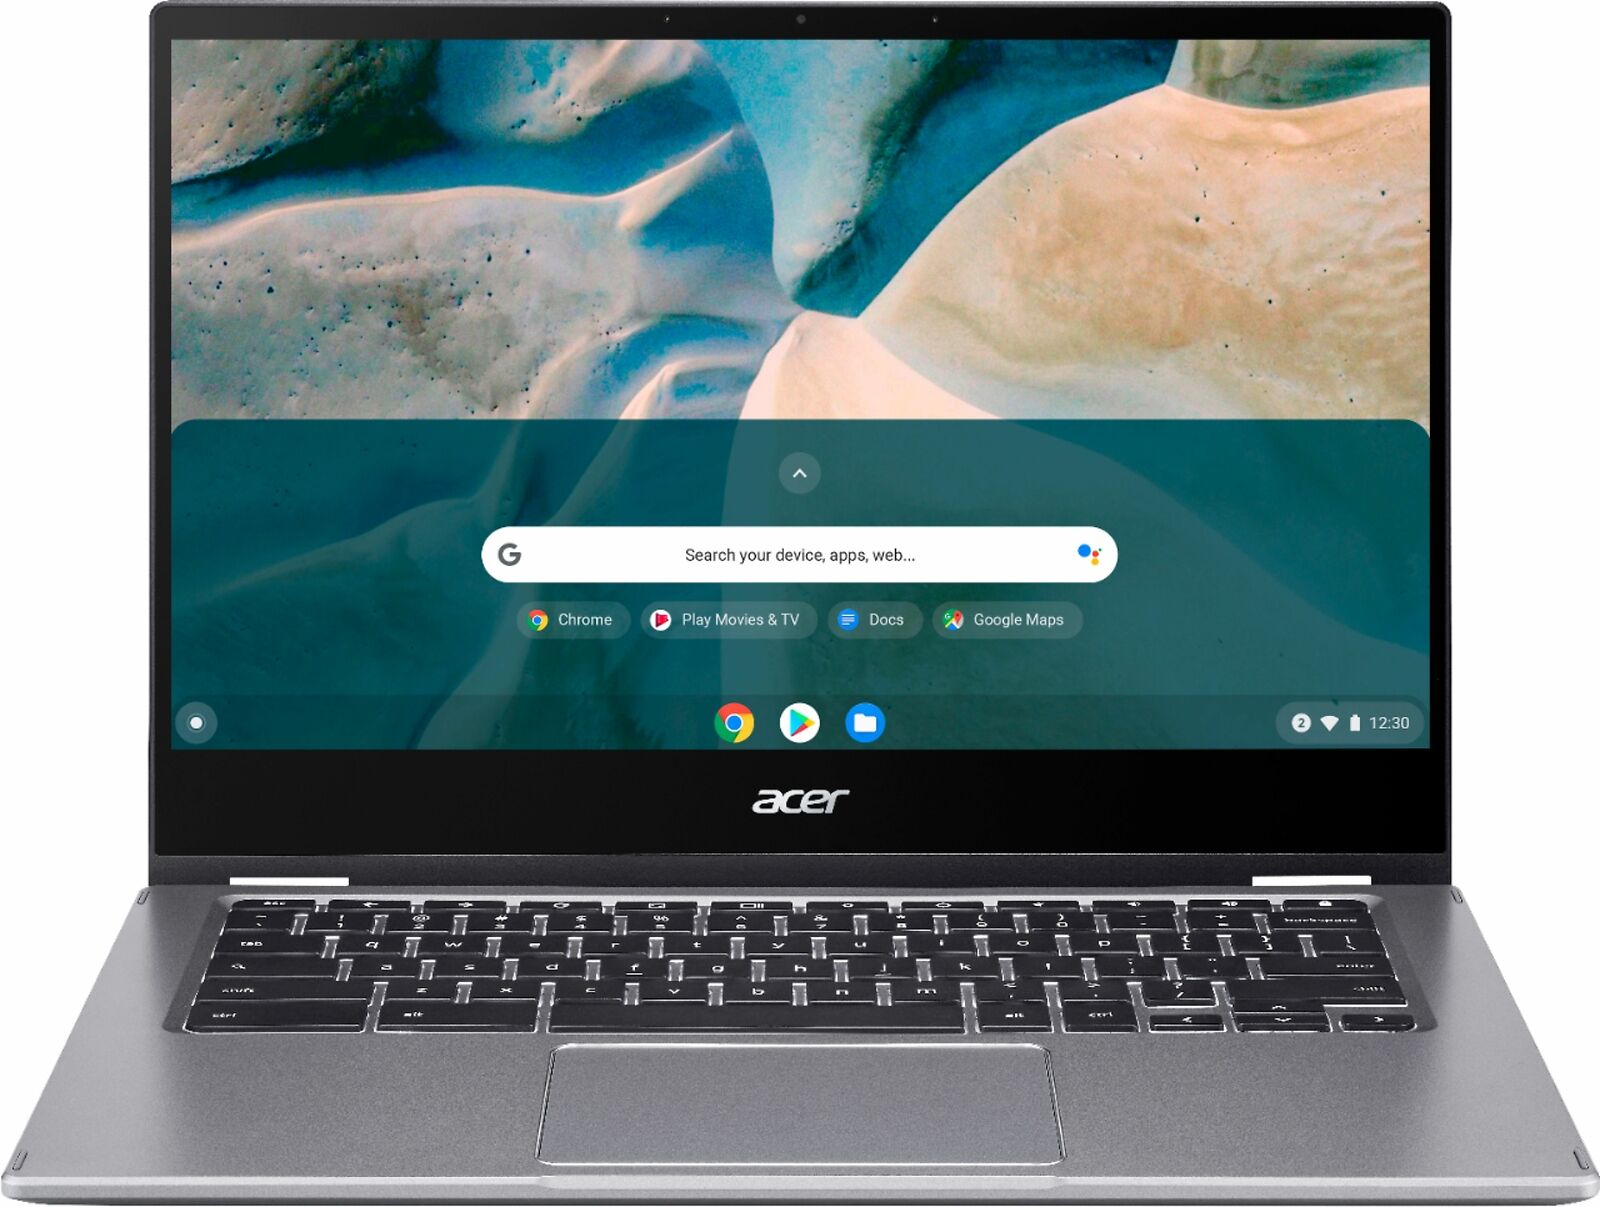 Acer Chromebook Spin 514 2-in-1: 14" FHD IPS Touch, Ryzen 3 3250C, 4GB DDR4, 64GB eMMC $199 + 5% SD Cashback + Free Shipping